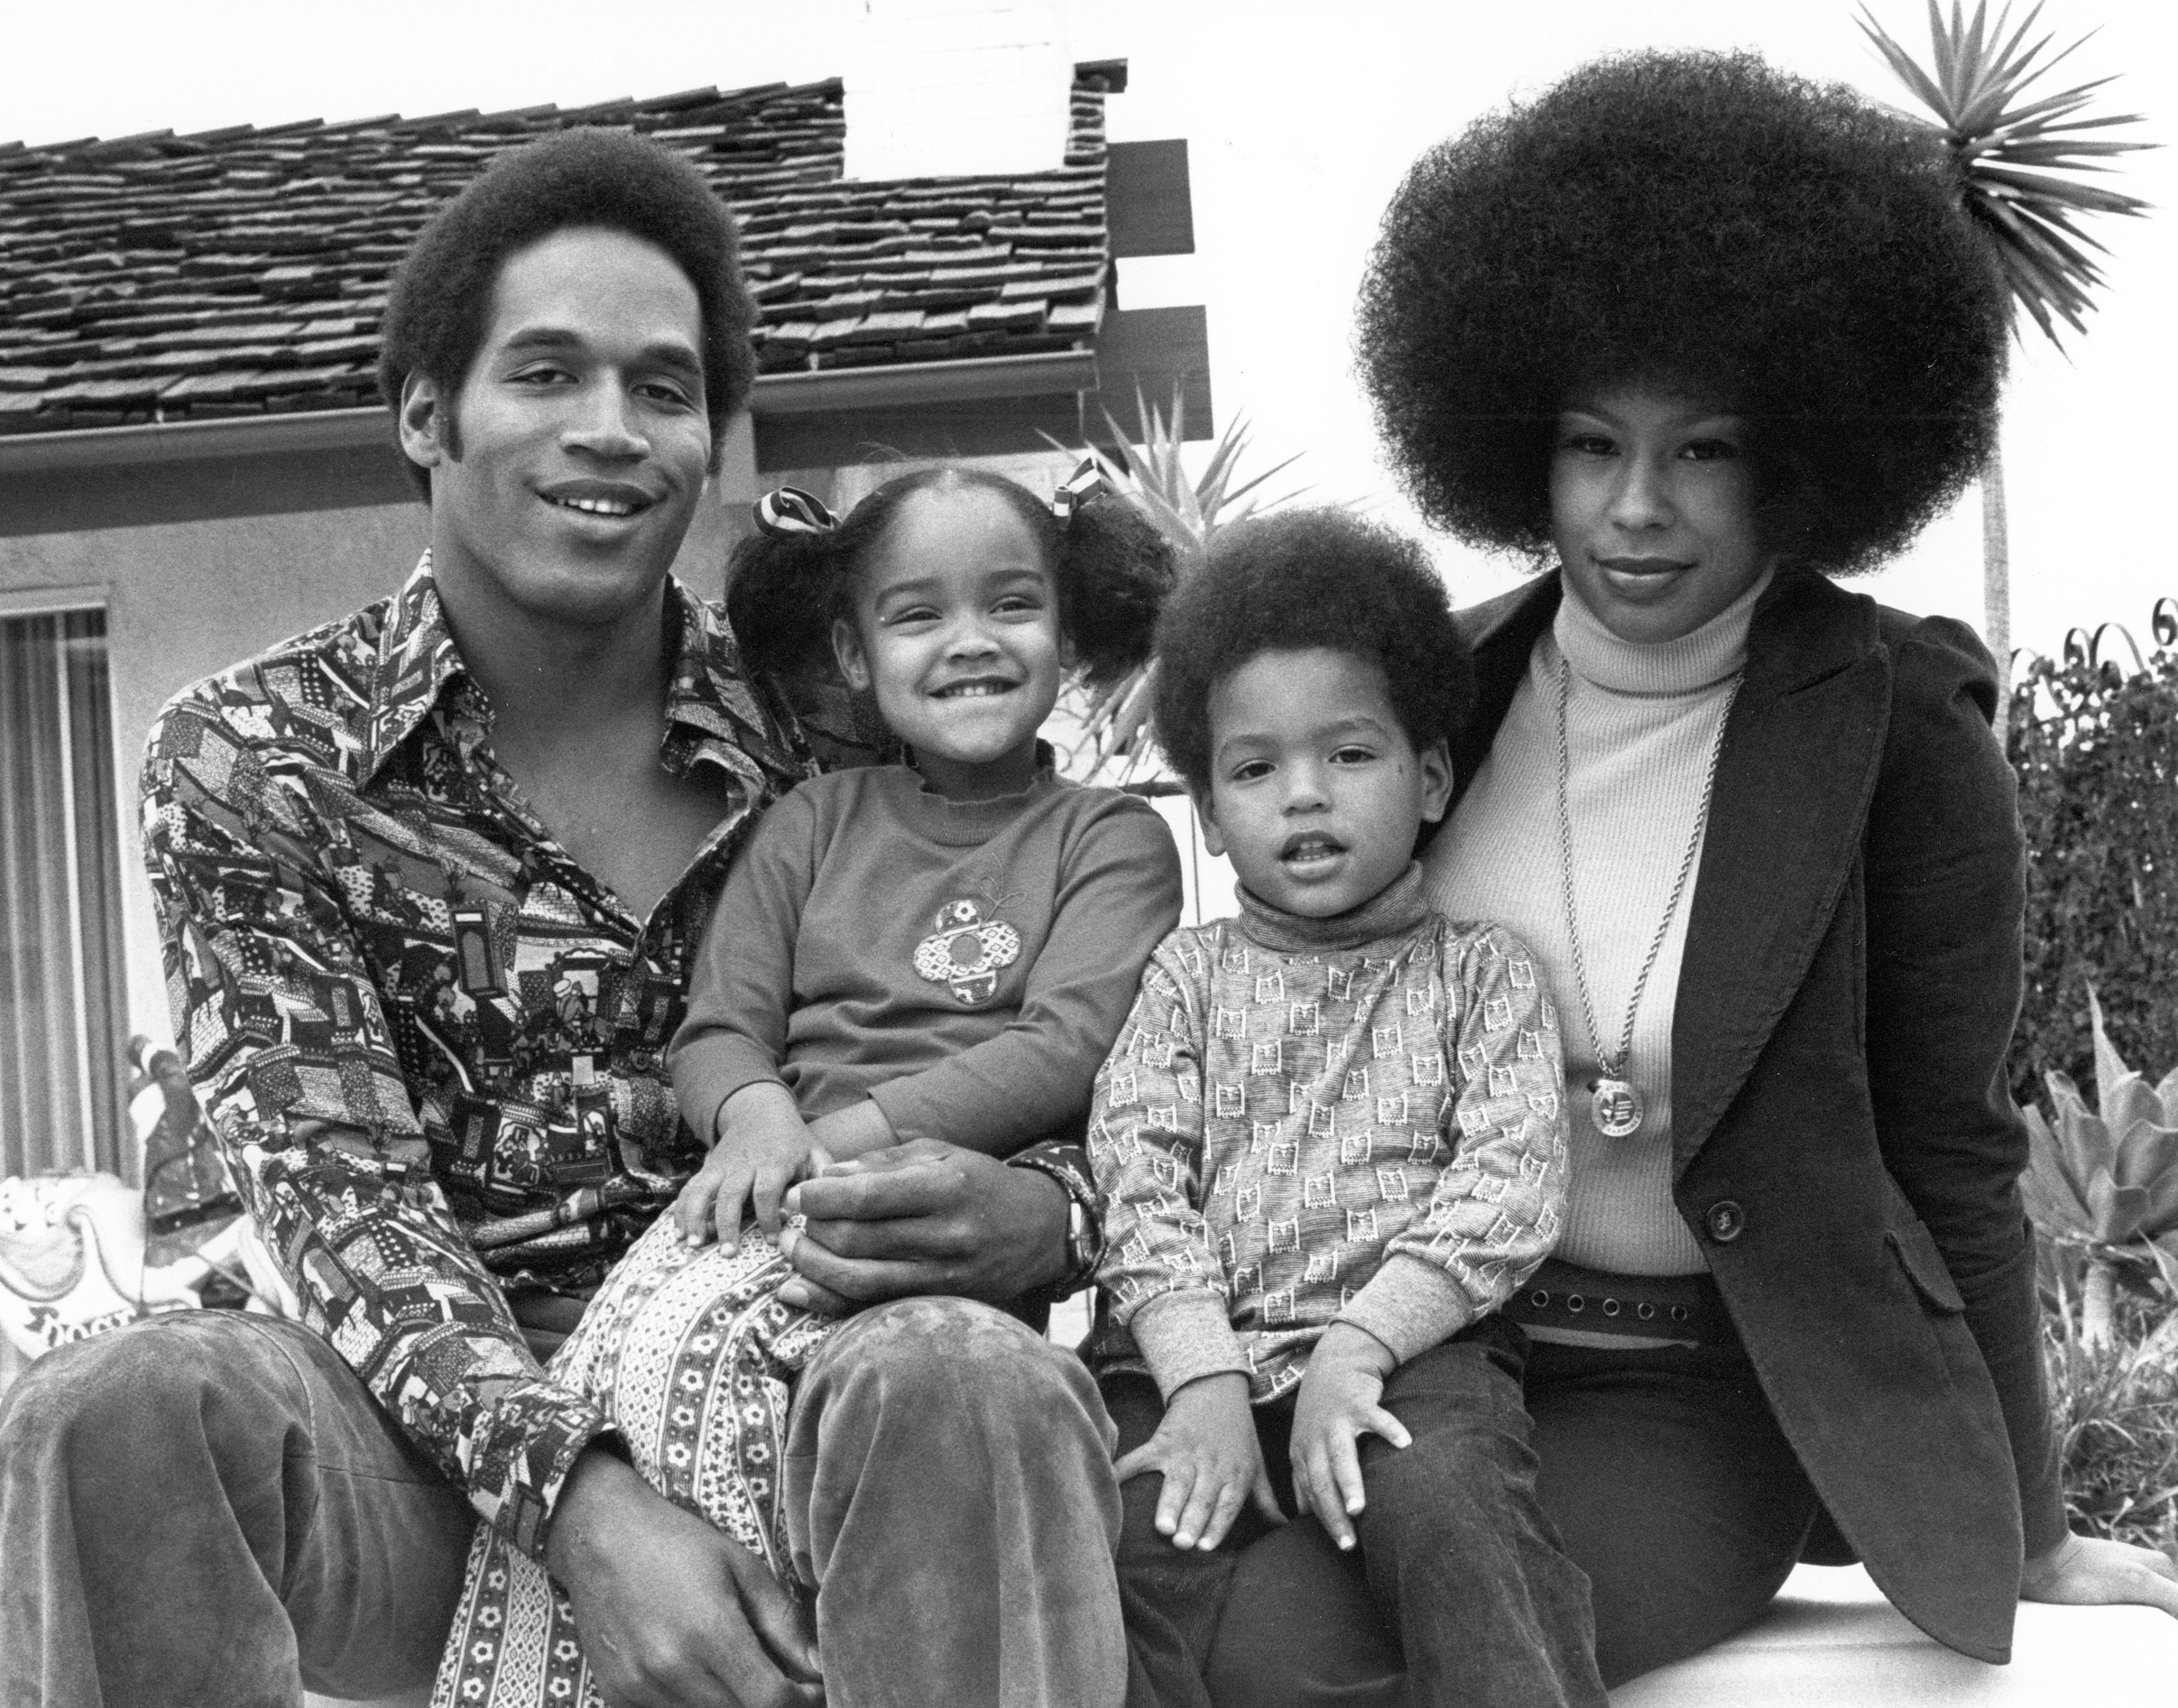 OJ Simspson, Marguerite Whitley and their children Arnelle and Jason on January 8, 1973, in Los Angeles, California | Source: Getty Images